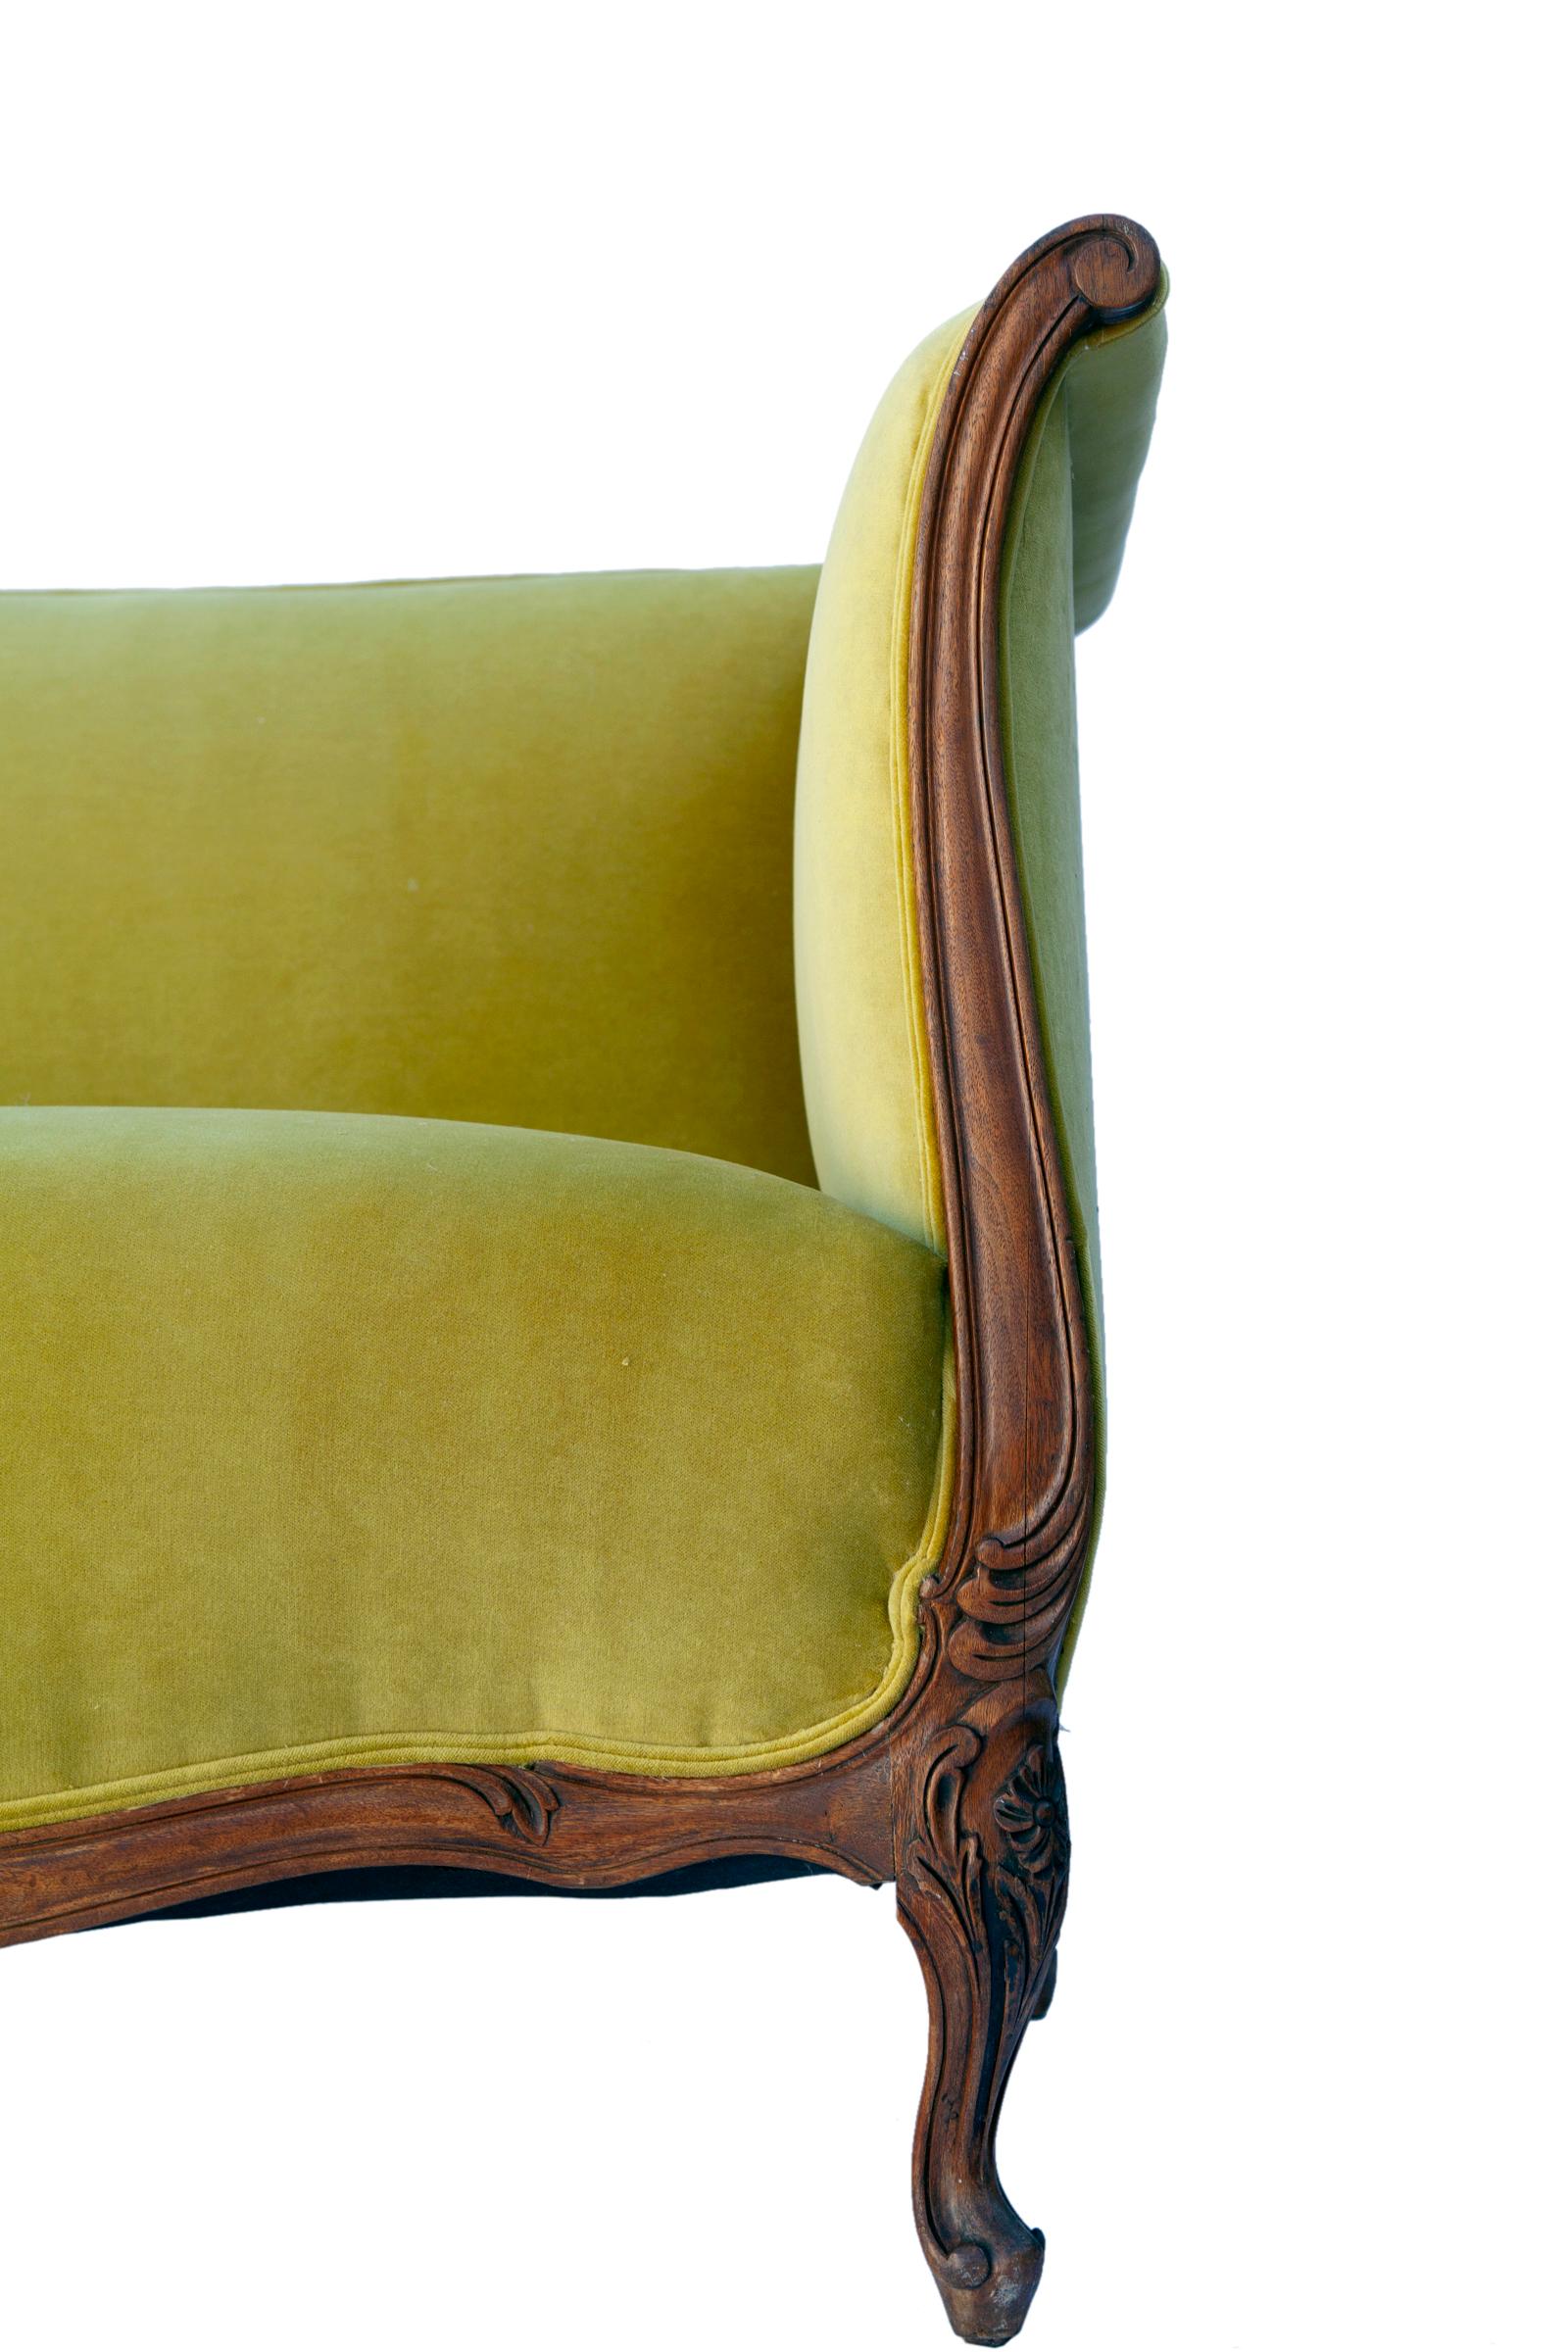 Stunning French antique Louis XV sofa hand carved frame in walnut even arm canape sofa, reupholstered in low pile Italian cotton velvet in chartreuse by Clarence House.
Hand carved floral details: scrolled arms, acanthus leaves, scalloped skirt. The